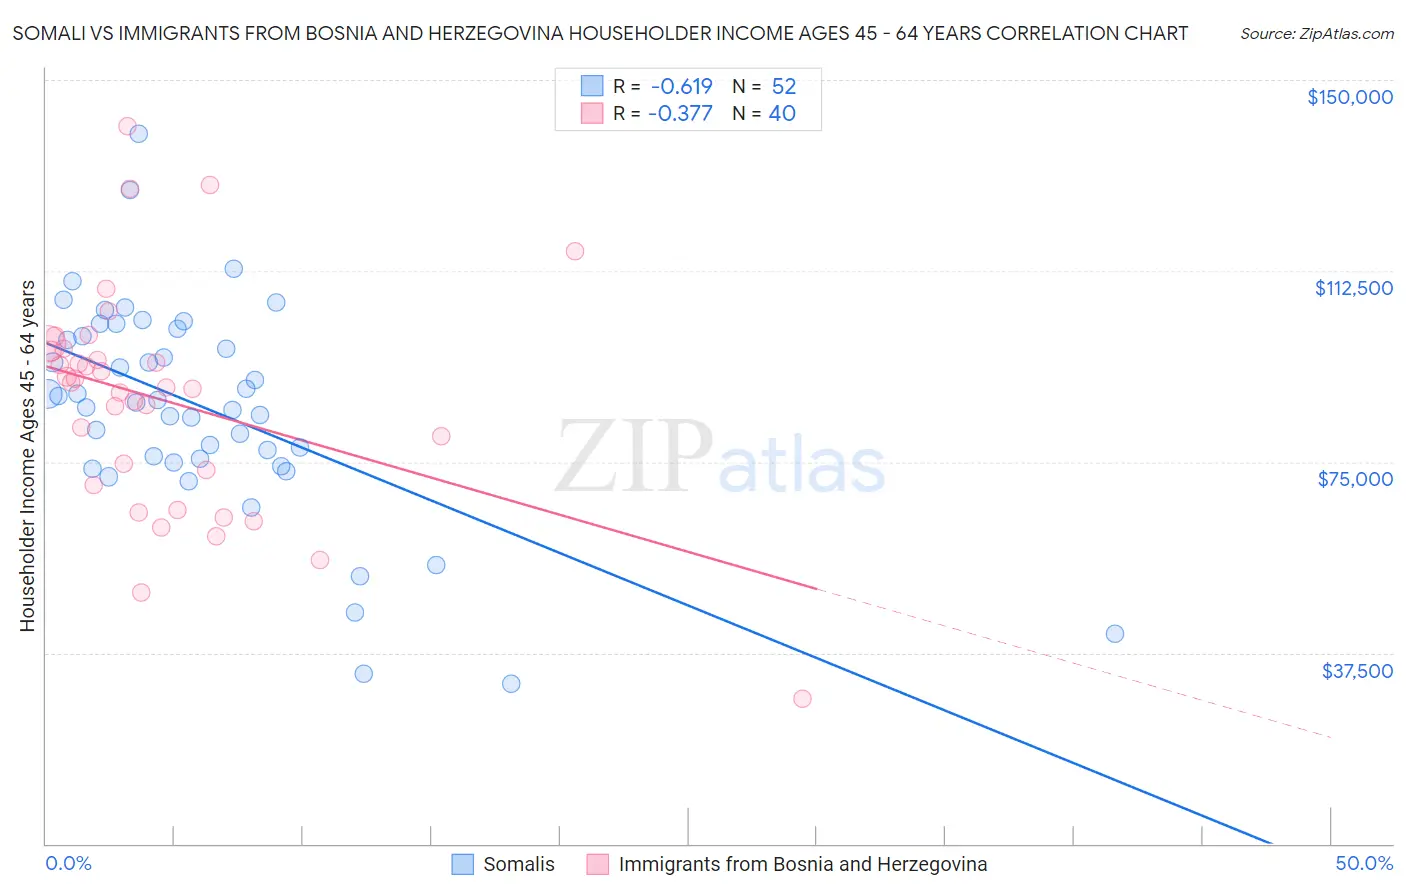 Somali vs Immigrants from Bosnia and Herzegovina Householder Income Ages 45 - 64 years